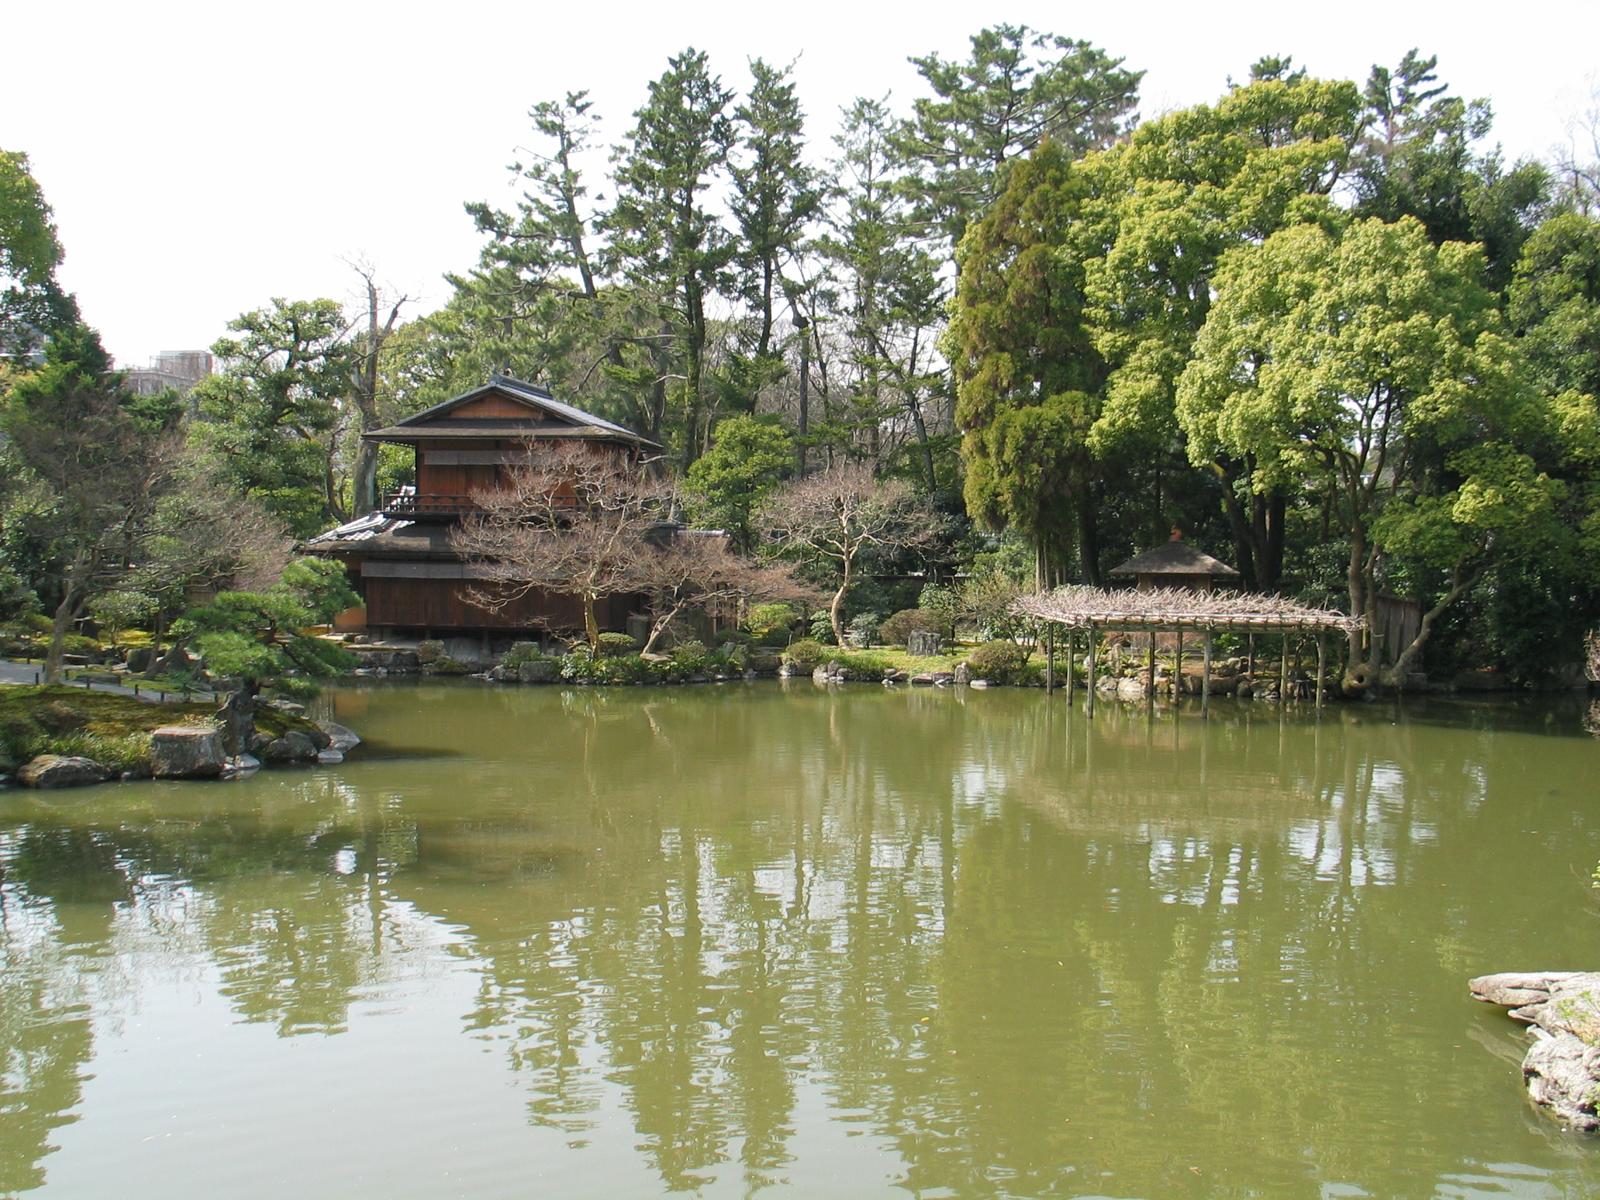 Around the Imperial Palace in Kyoto